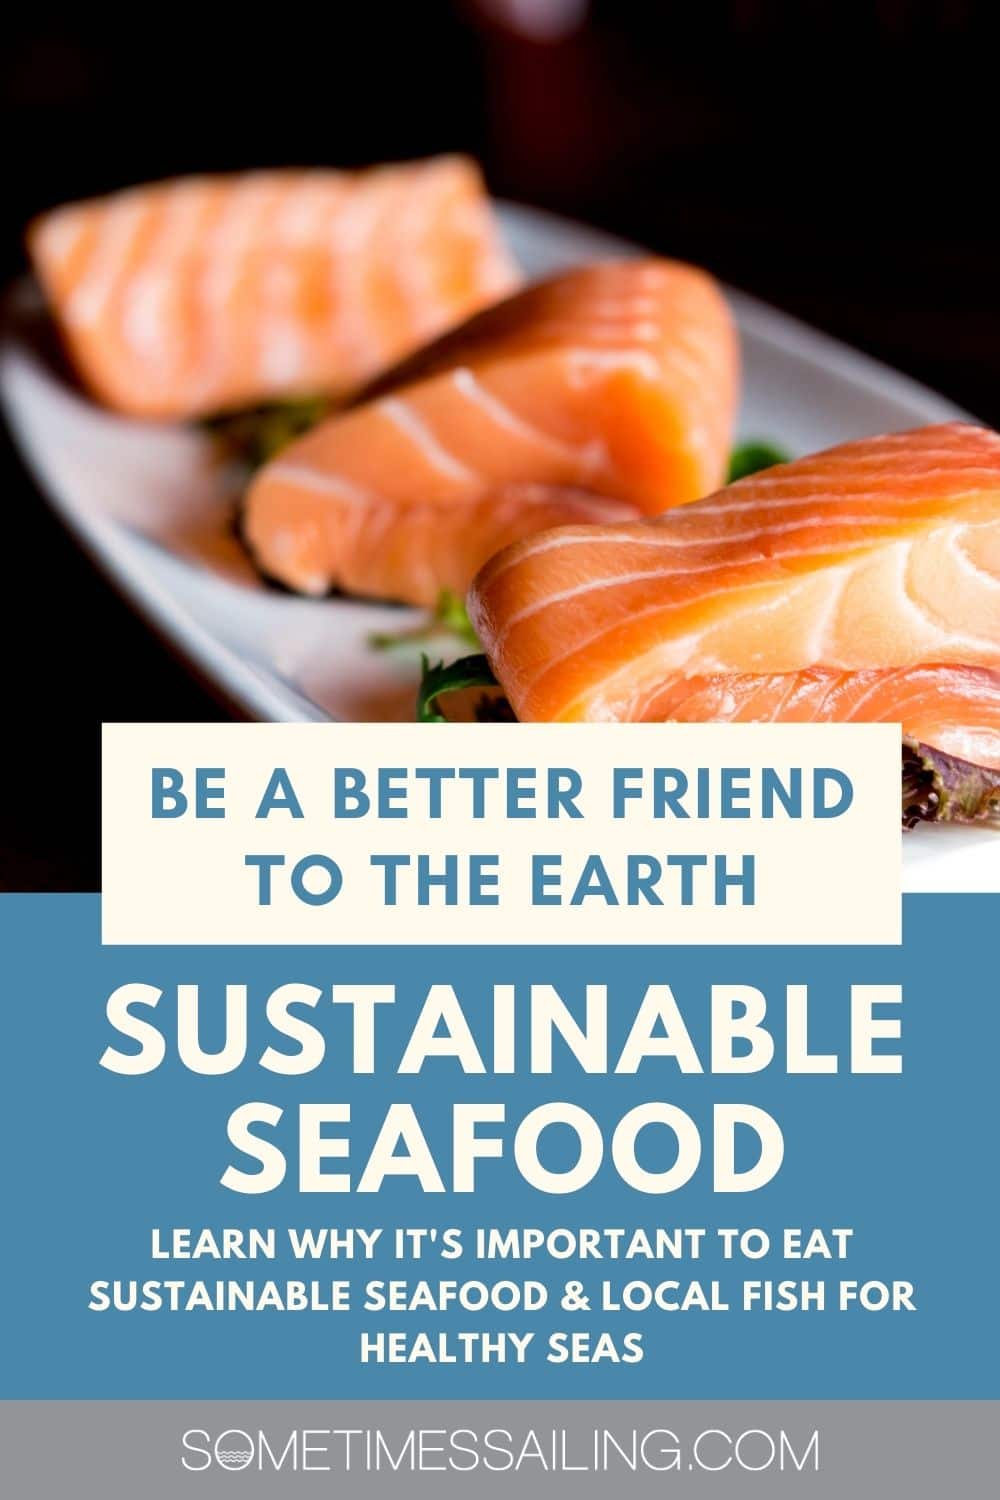 Learn about why sustainable seafood and eating local fish are important for healthy seas, with a photo of raw salmon filets.